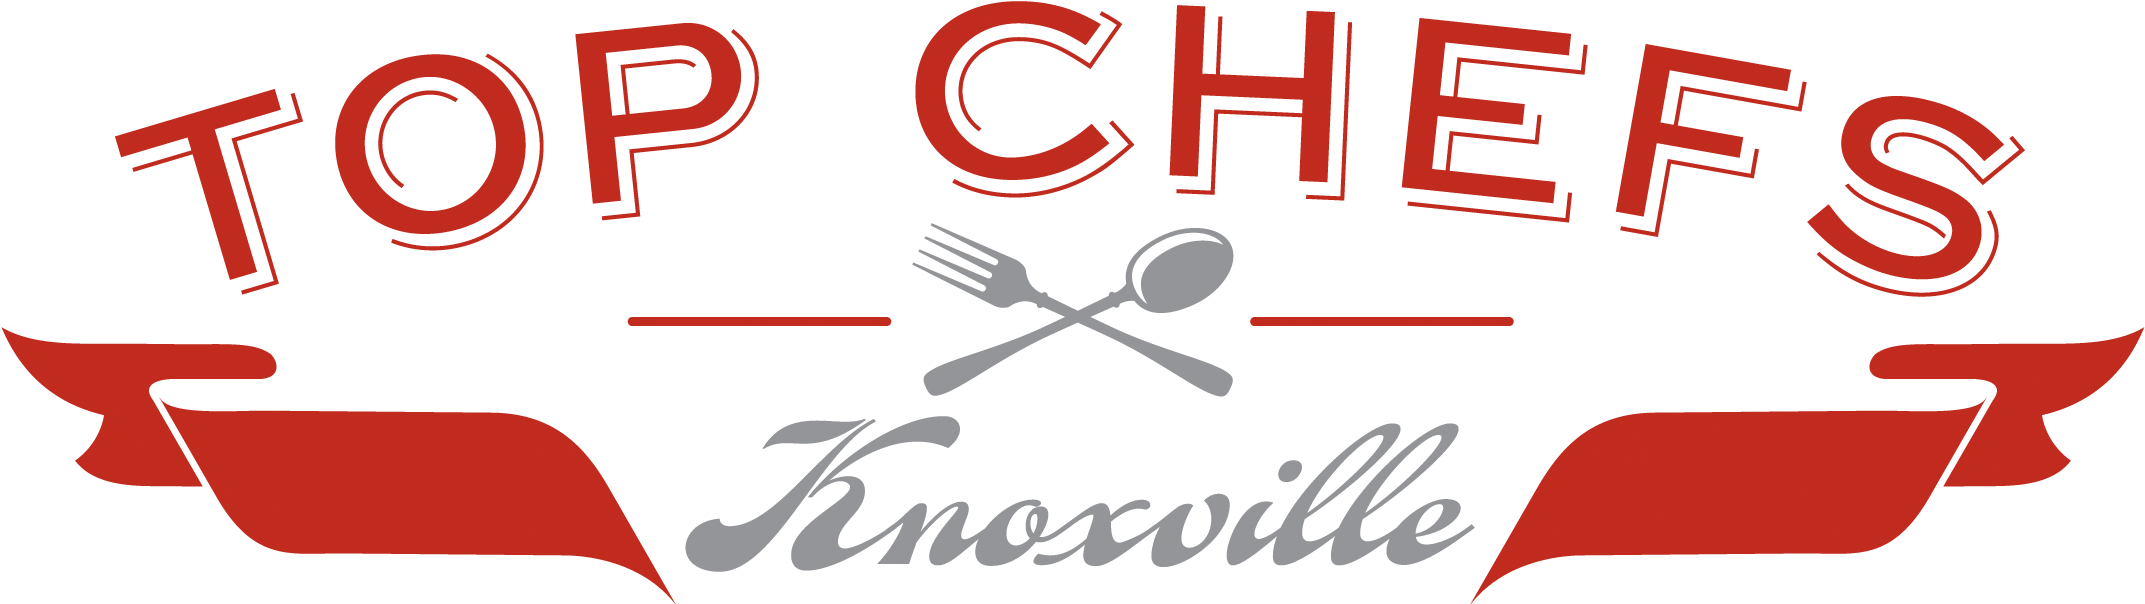 Tickets To Top Chef Knoxville - Top Chef Knoxville (2169x659)